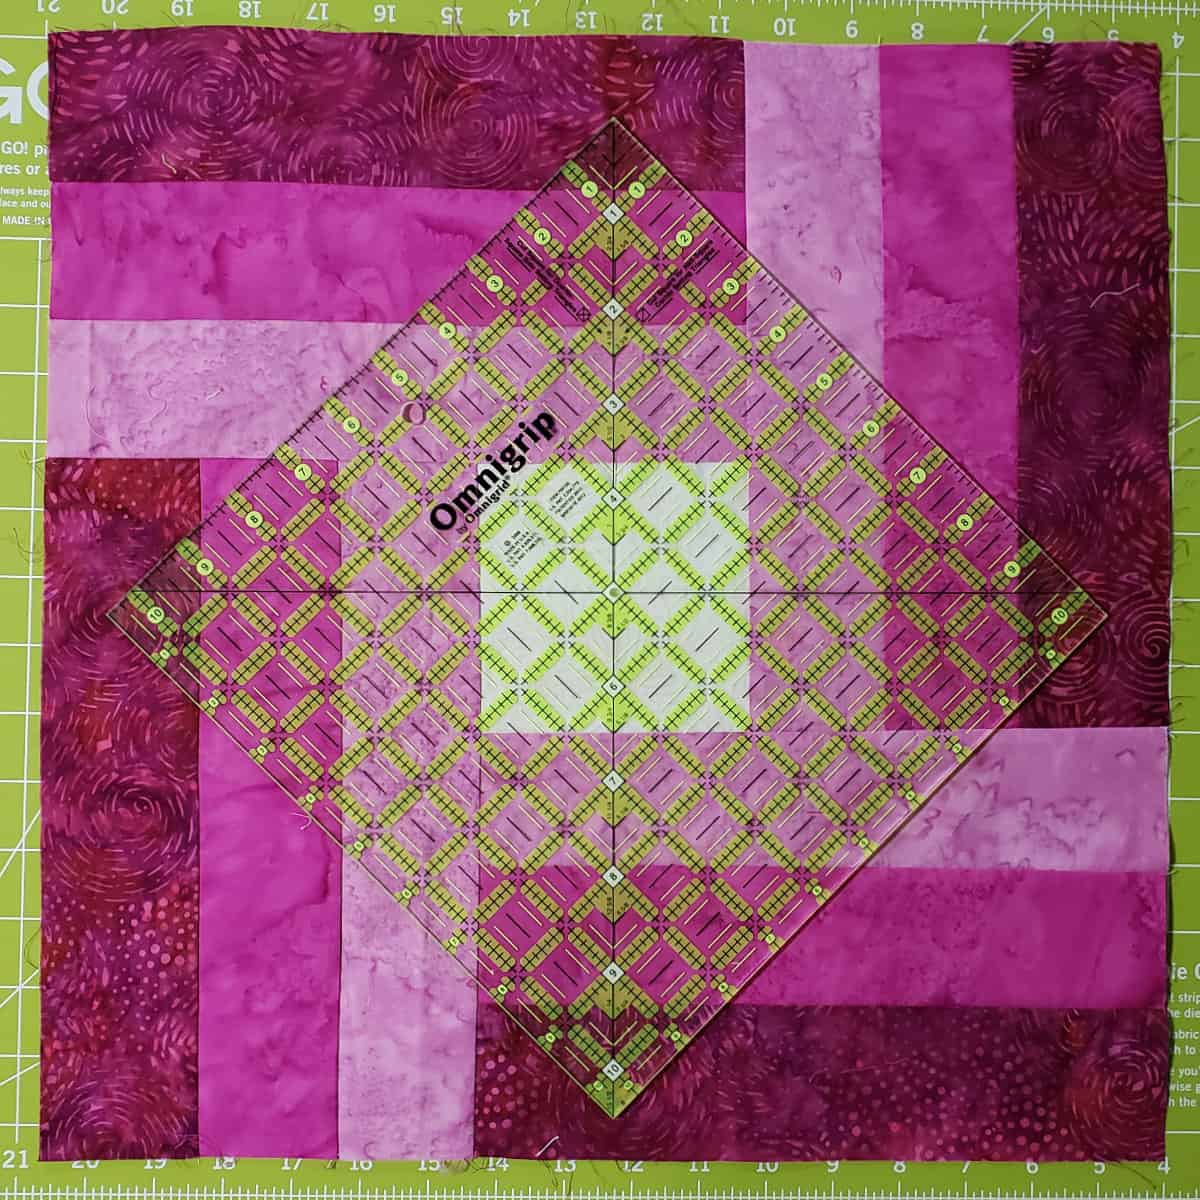 Place a square ruler on the quilt block